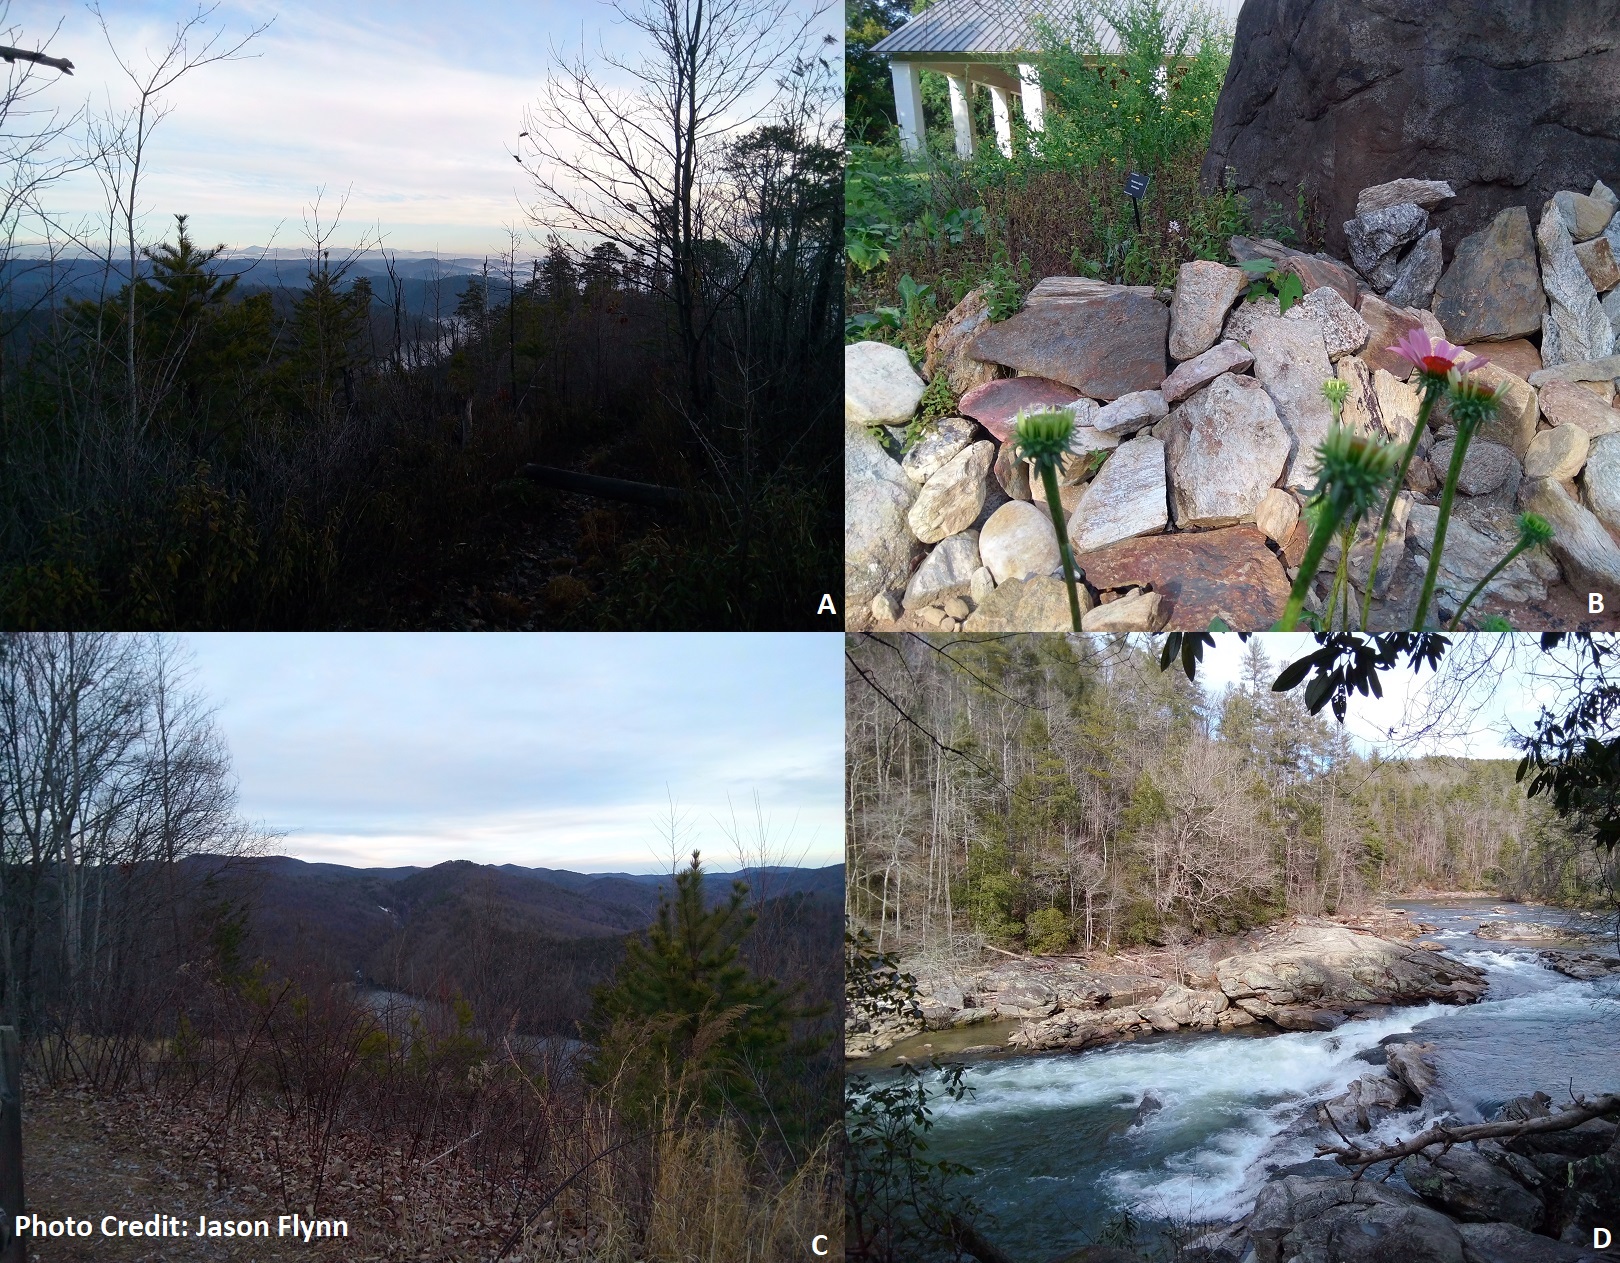 A) Brevard Zone and Blue Ridge in Oconee county B) Meeting of Blue Ridge, Brevard Zone, Inner Piedmont rocks C) Largest series of waterfalls east of the Mississippi River – the lower part is in South Carolina D) Chattooga River in the Blue Ridge